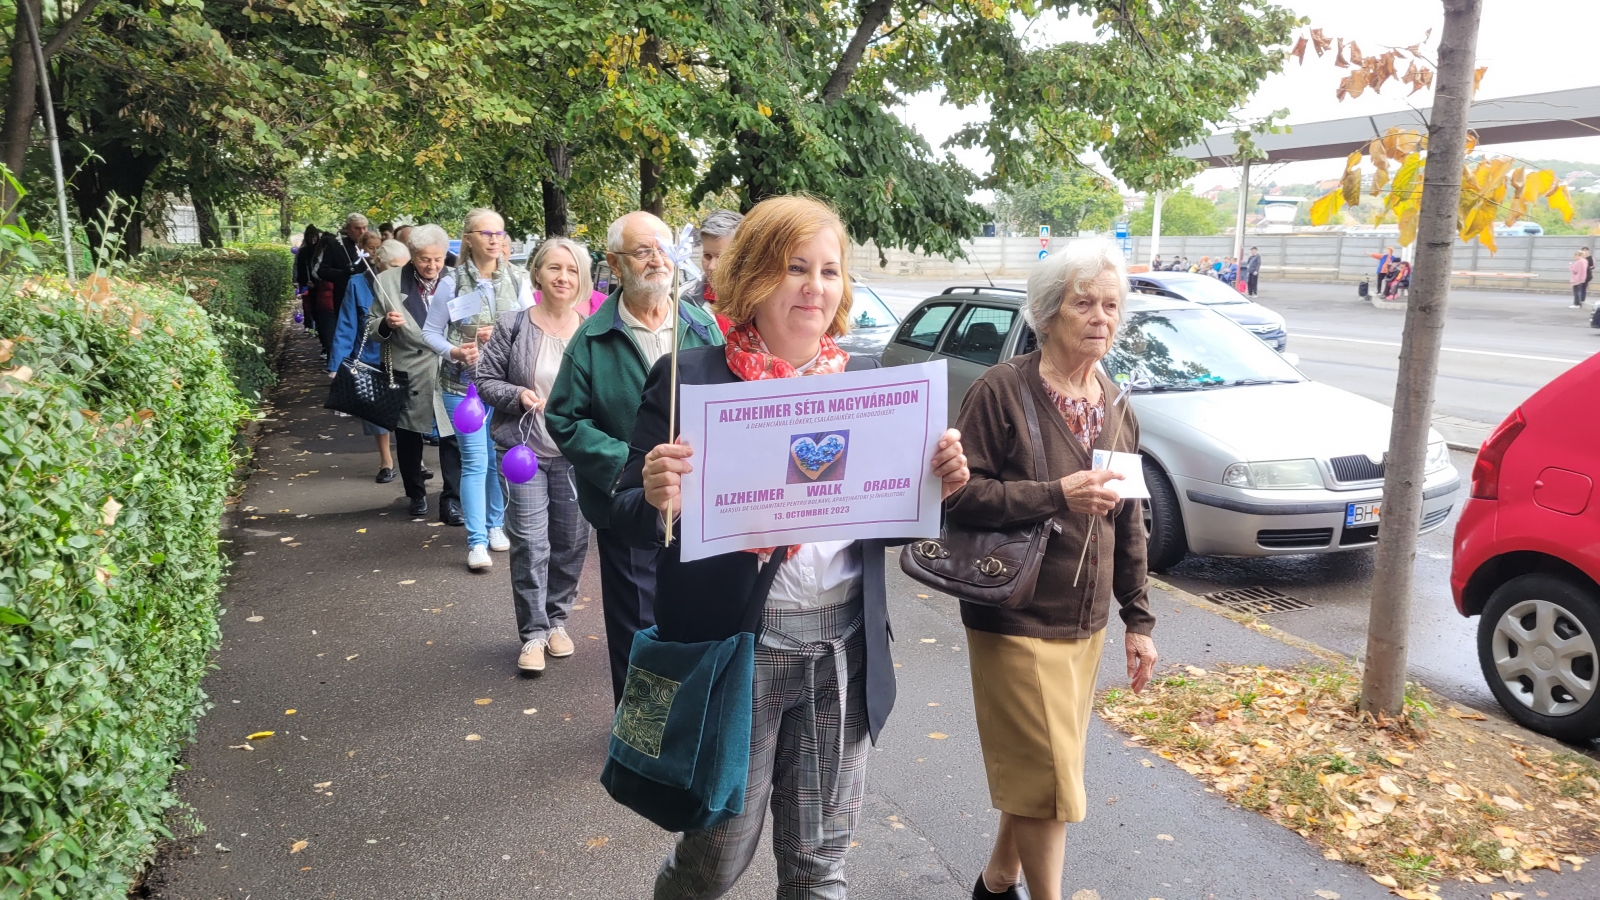 March of solidarity for Alzheimer